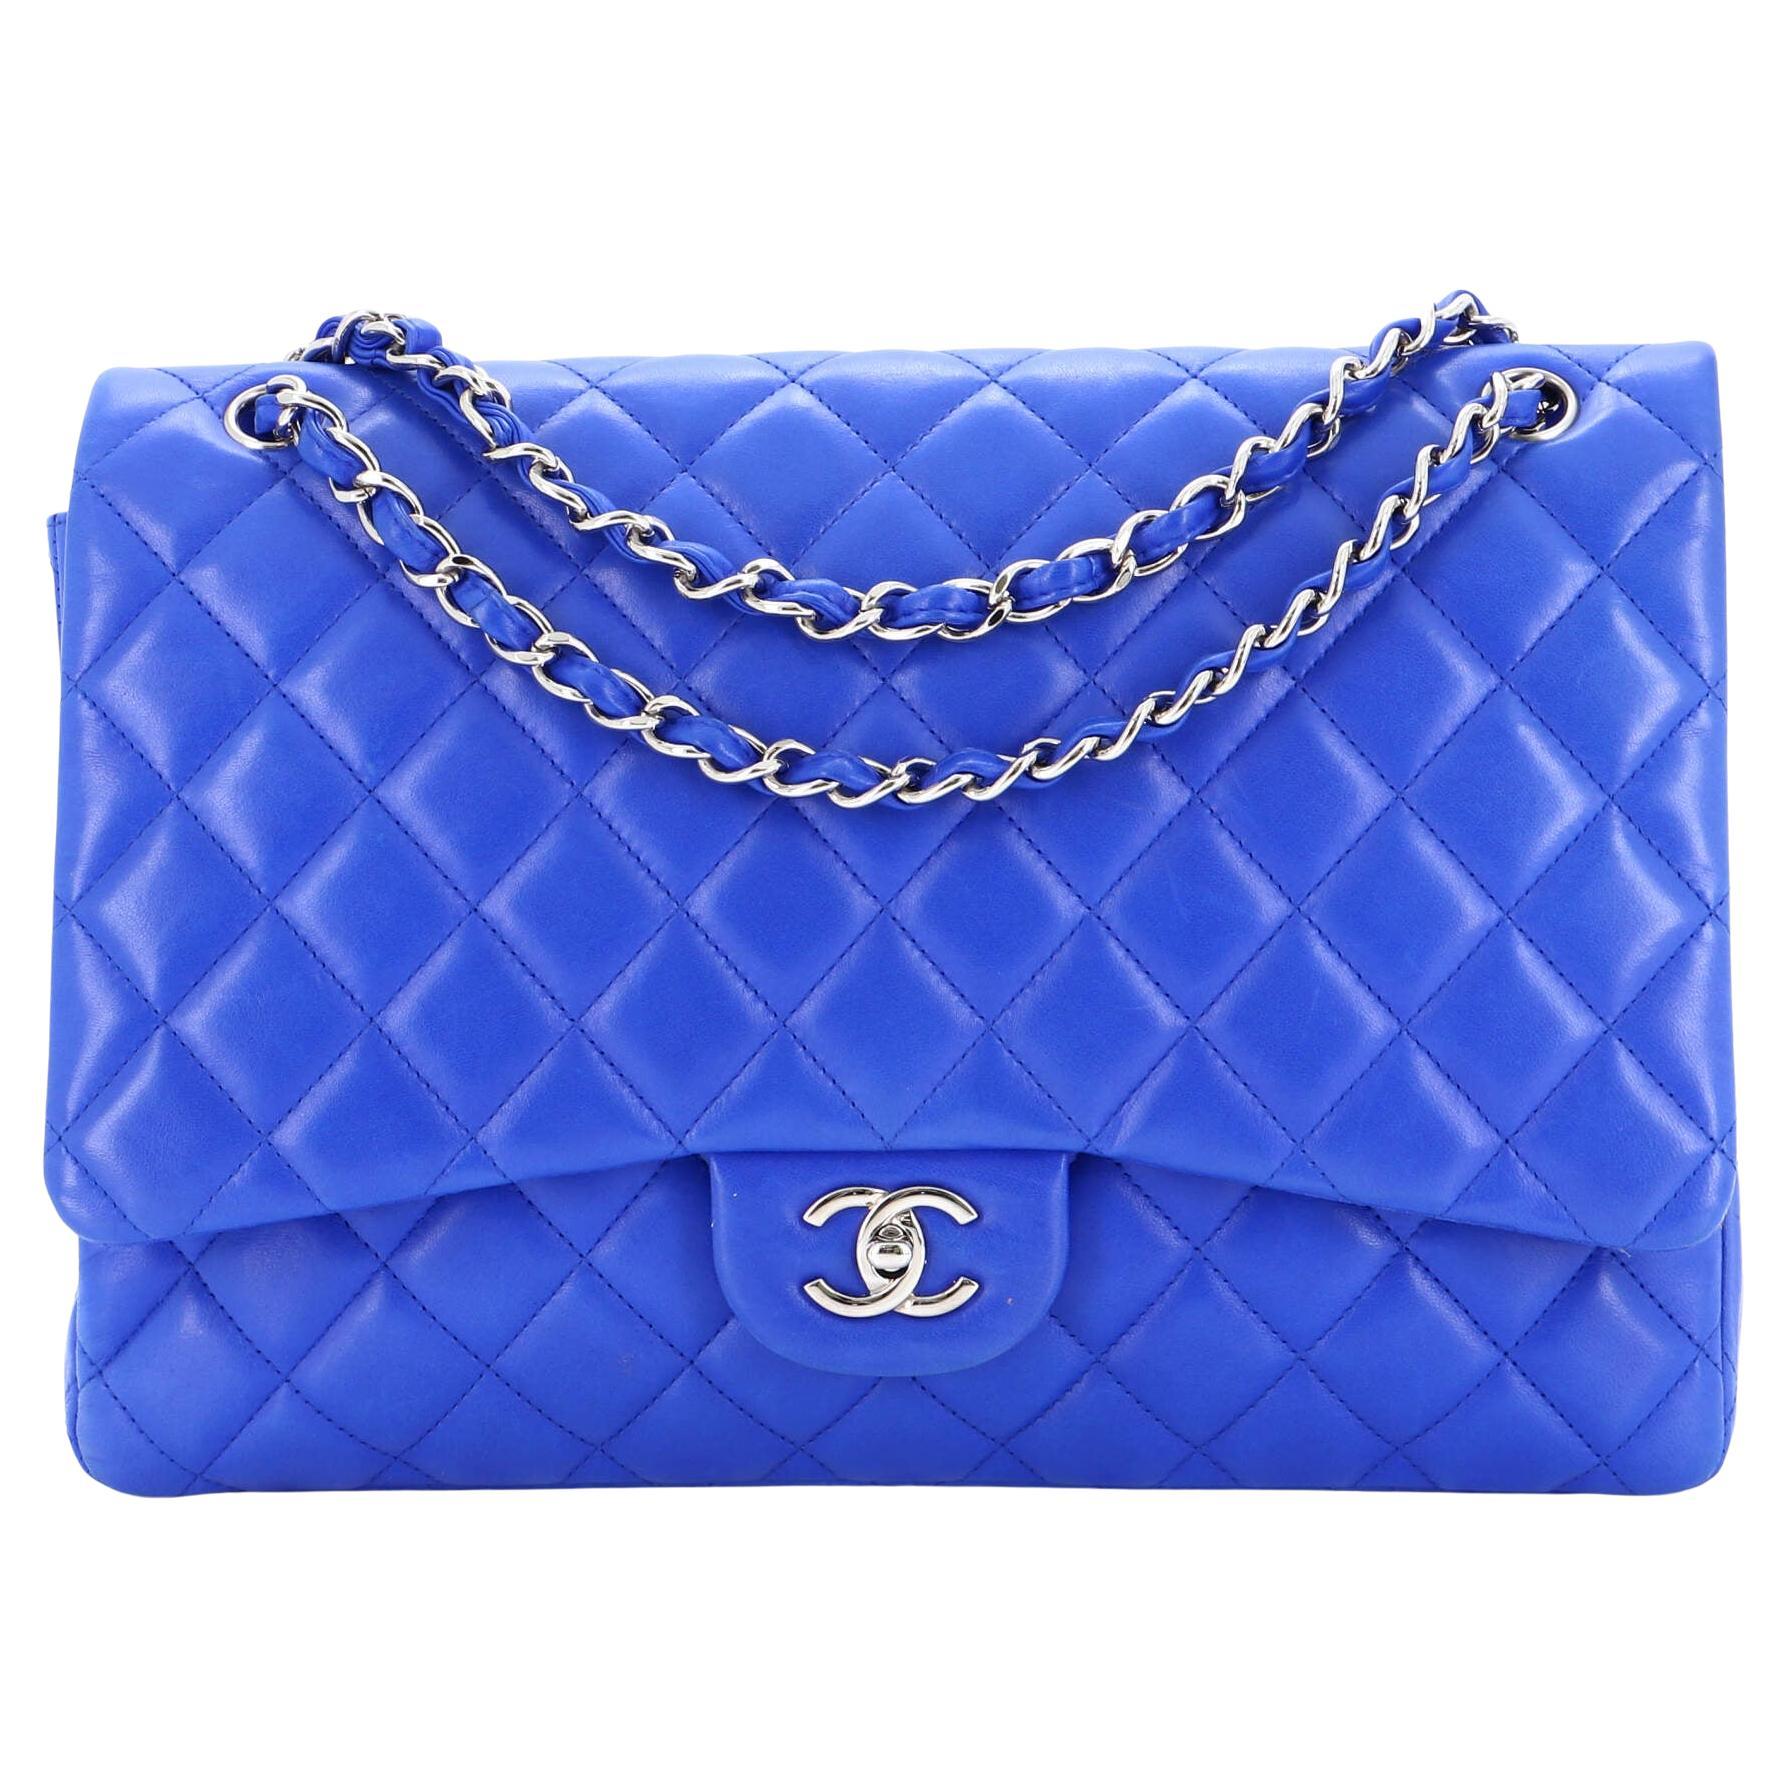 CHANEL Lambskin Quilted Resin Bi-Color Chain Flap Bag Navy 997993